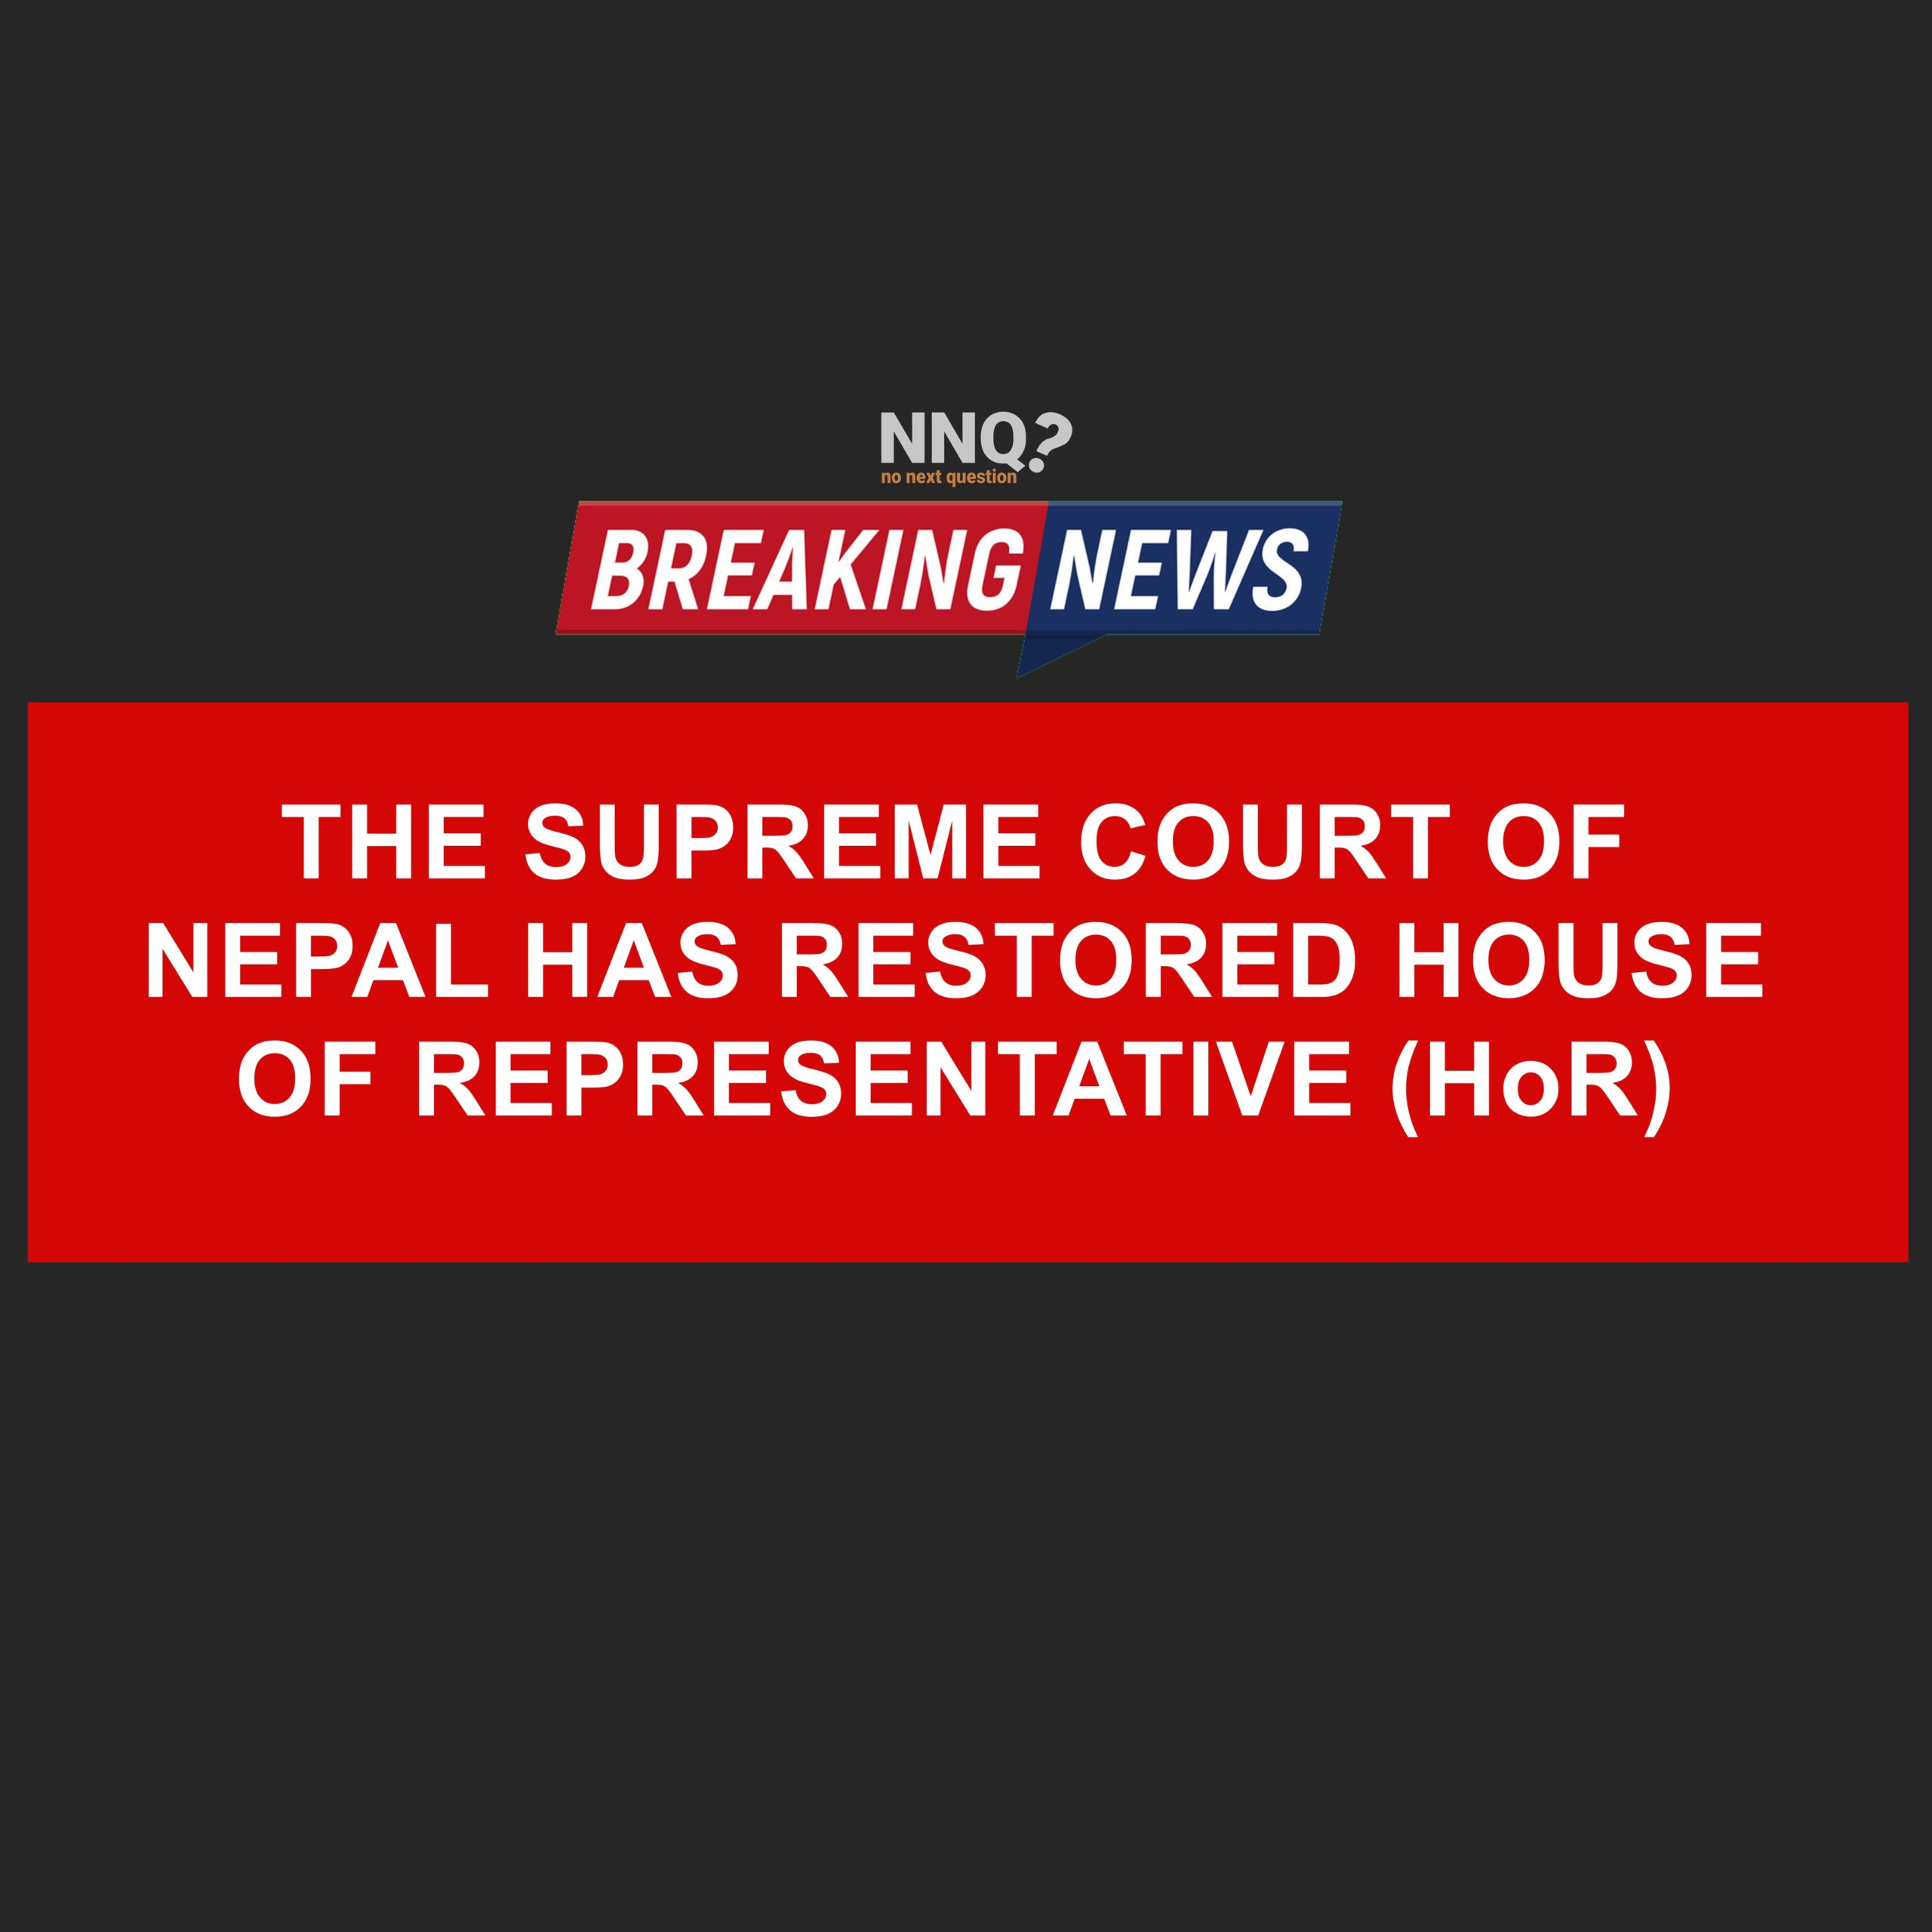 THE SUPREME COURT OF  NEPAL HAS RESTORED HOUSE  OF REPRESENTATIVE (HoR)